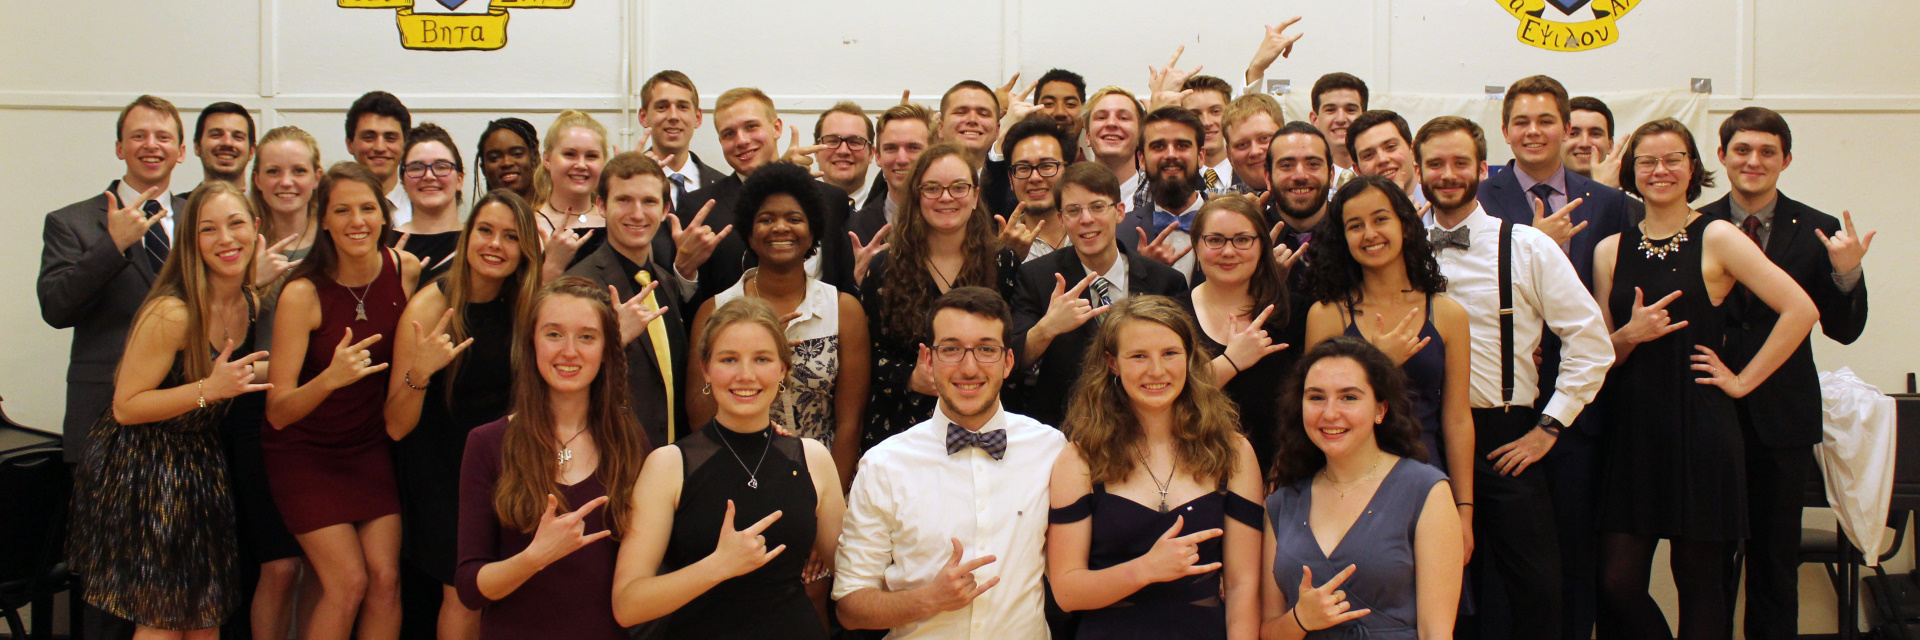 Members of the Kappa Kappa Psi fraternity pose before a social event.